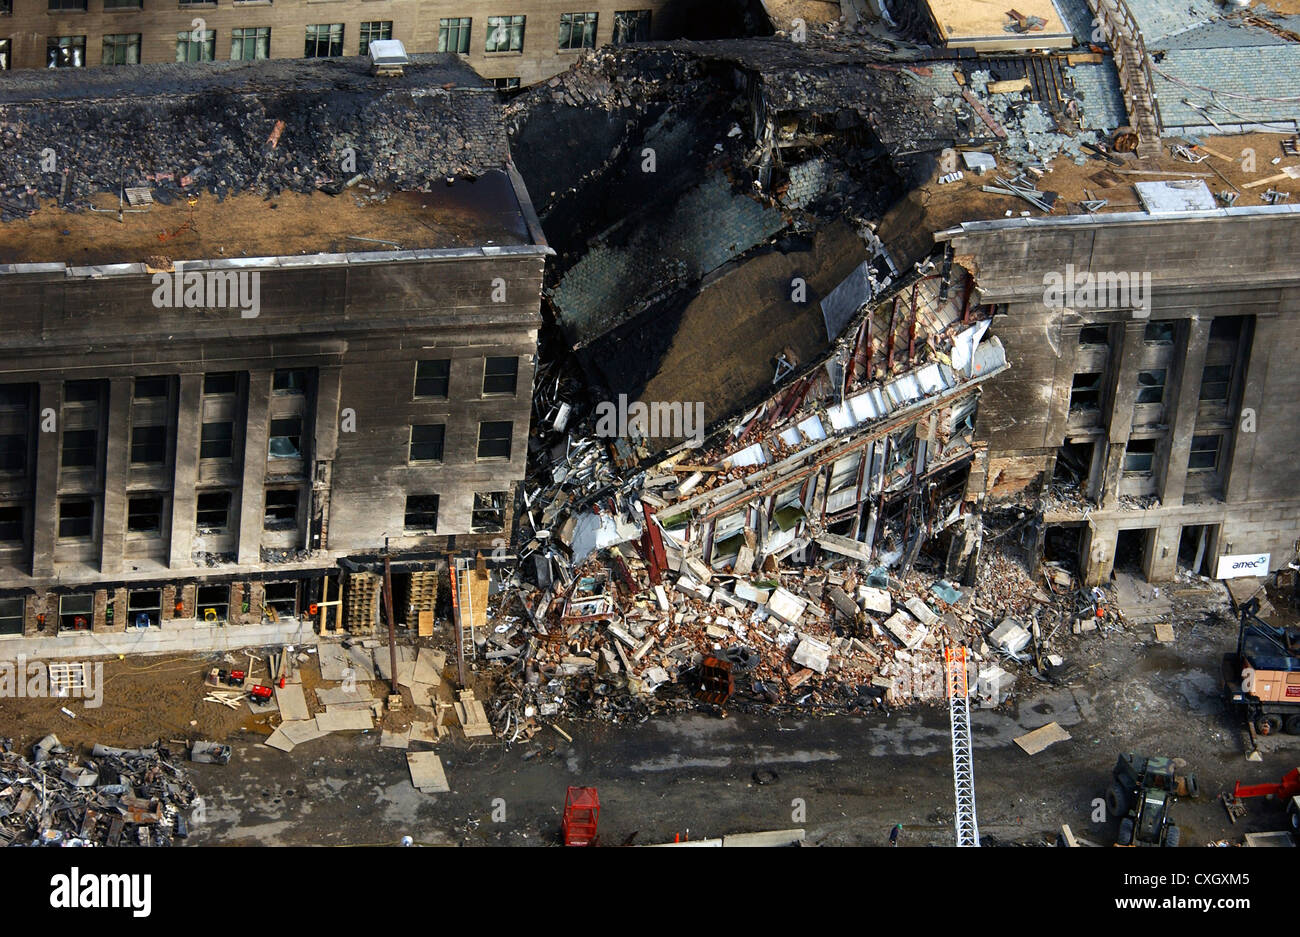 Aerial view showing the collapsed section of the Pentagon destroyed by a terrorist attack as recovery efforts continue September 14, 2001. On September 11th American Airlines Flight 77 hijacked by terrorists fly into the building killing all 64 passengers onboard and 125 people on the ground. Stock Photo